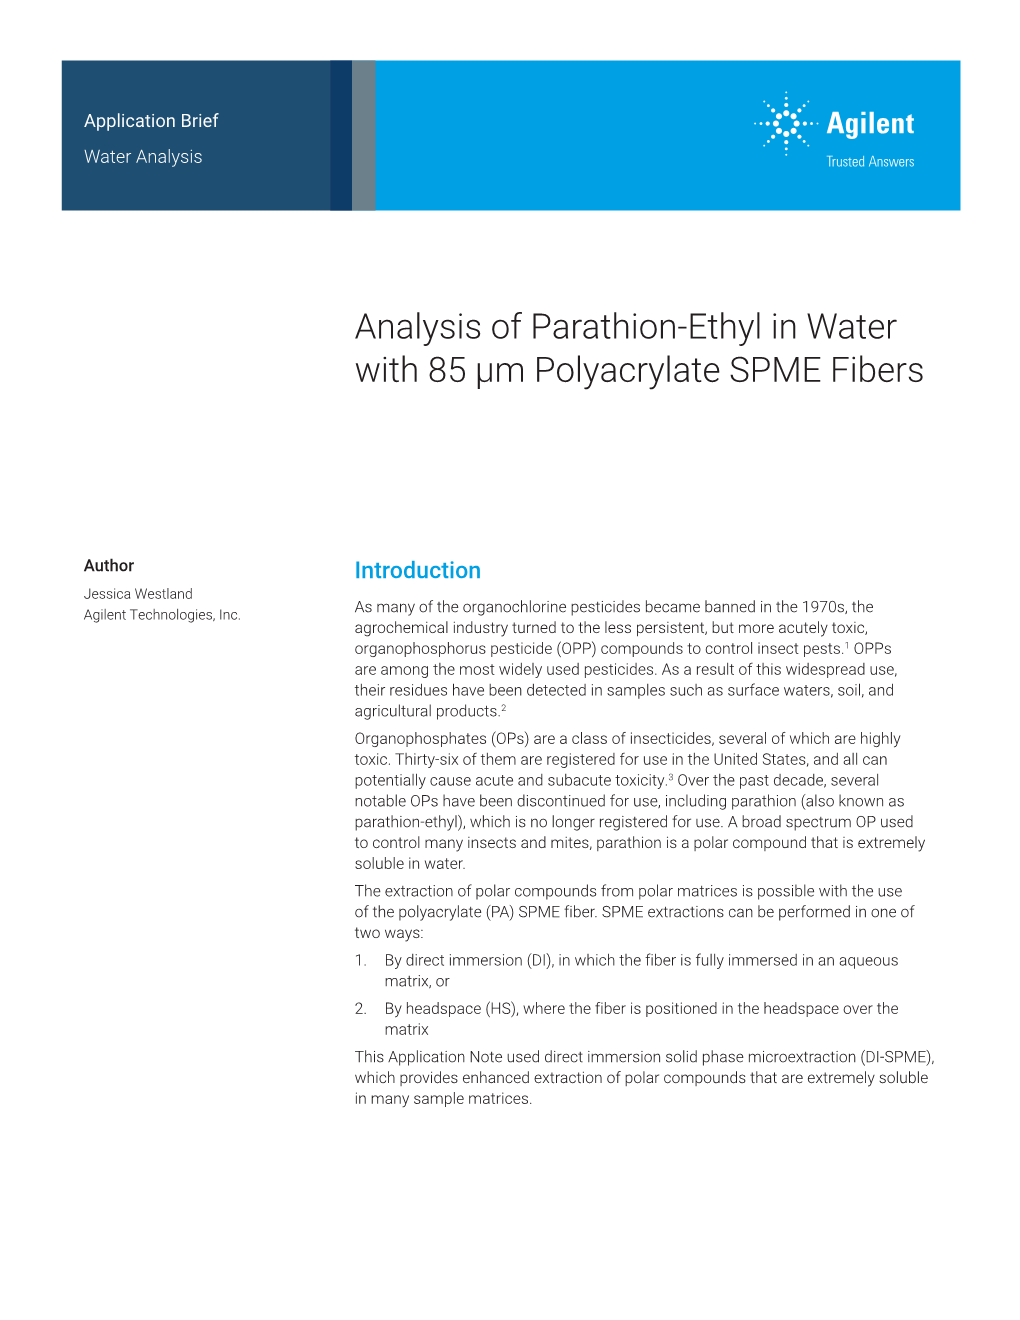 Analysis of Parathion-Ethyl in Water with 85 Μm Polyacrylate SPME Fibers